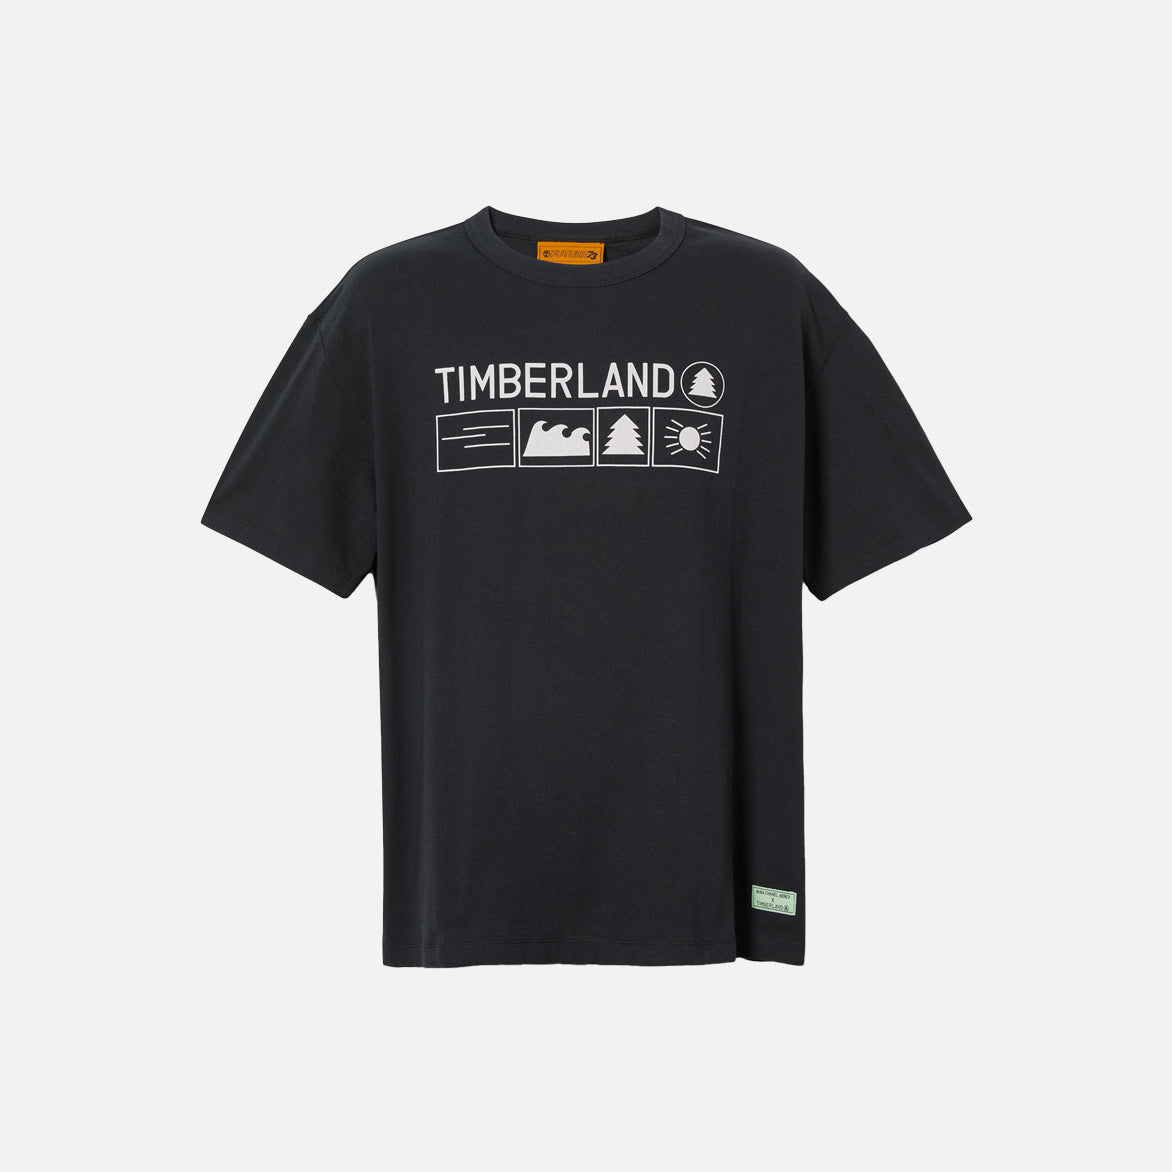 Timberland Men's x Nina Chanel Abney T-Shirt in Black, Size: XL